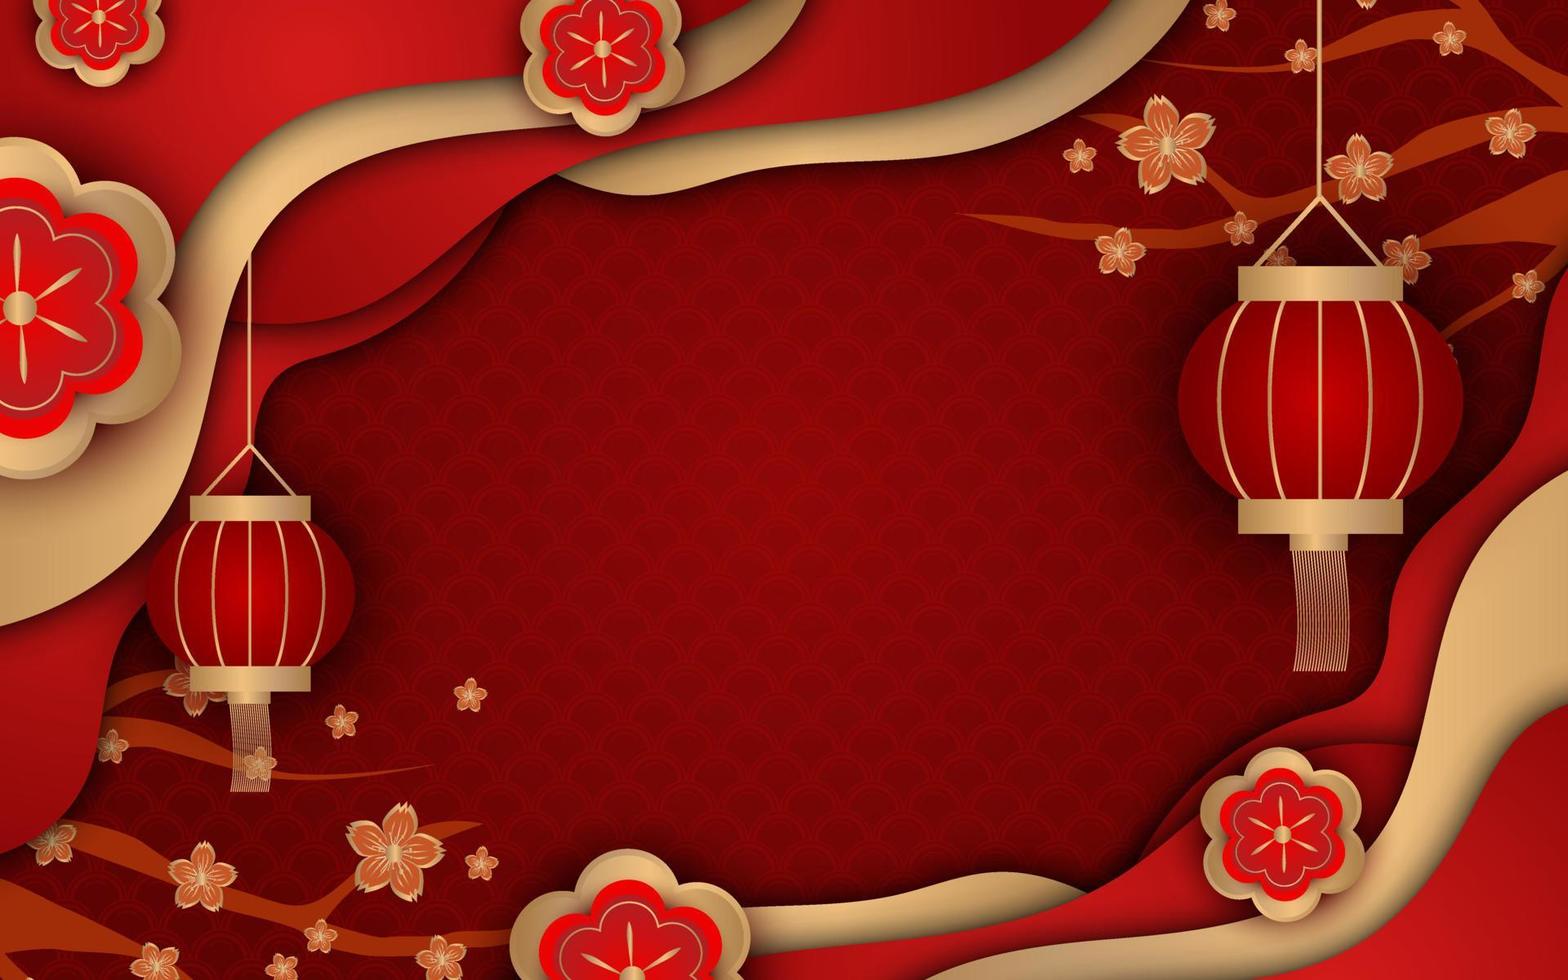 Chinese New Year Background vector